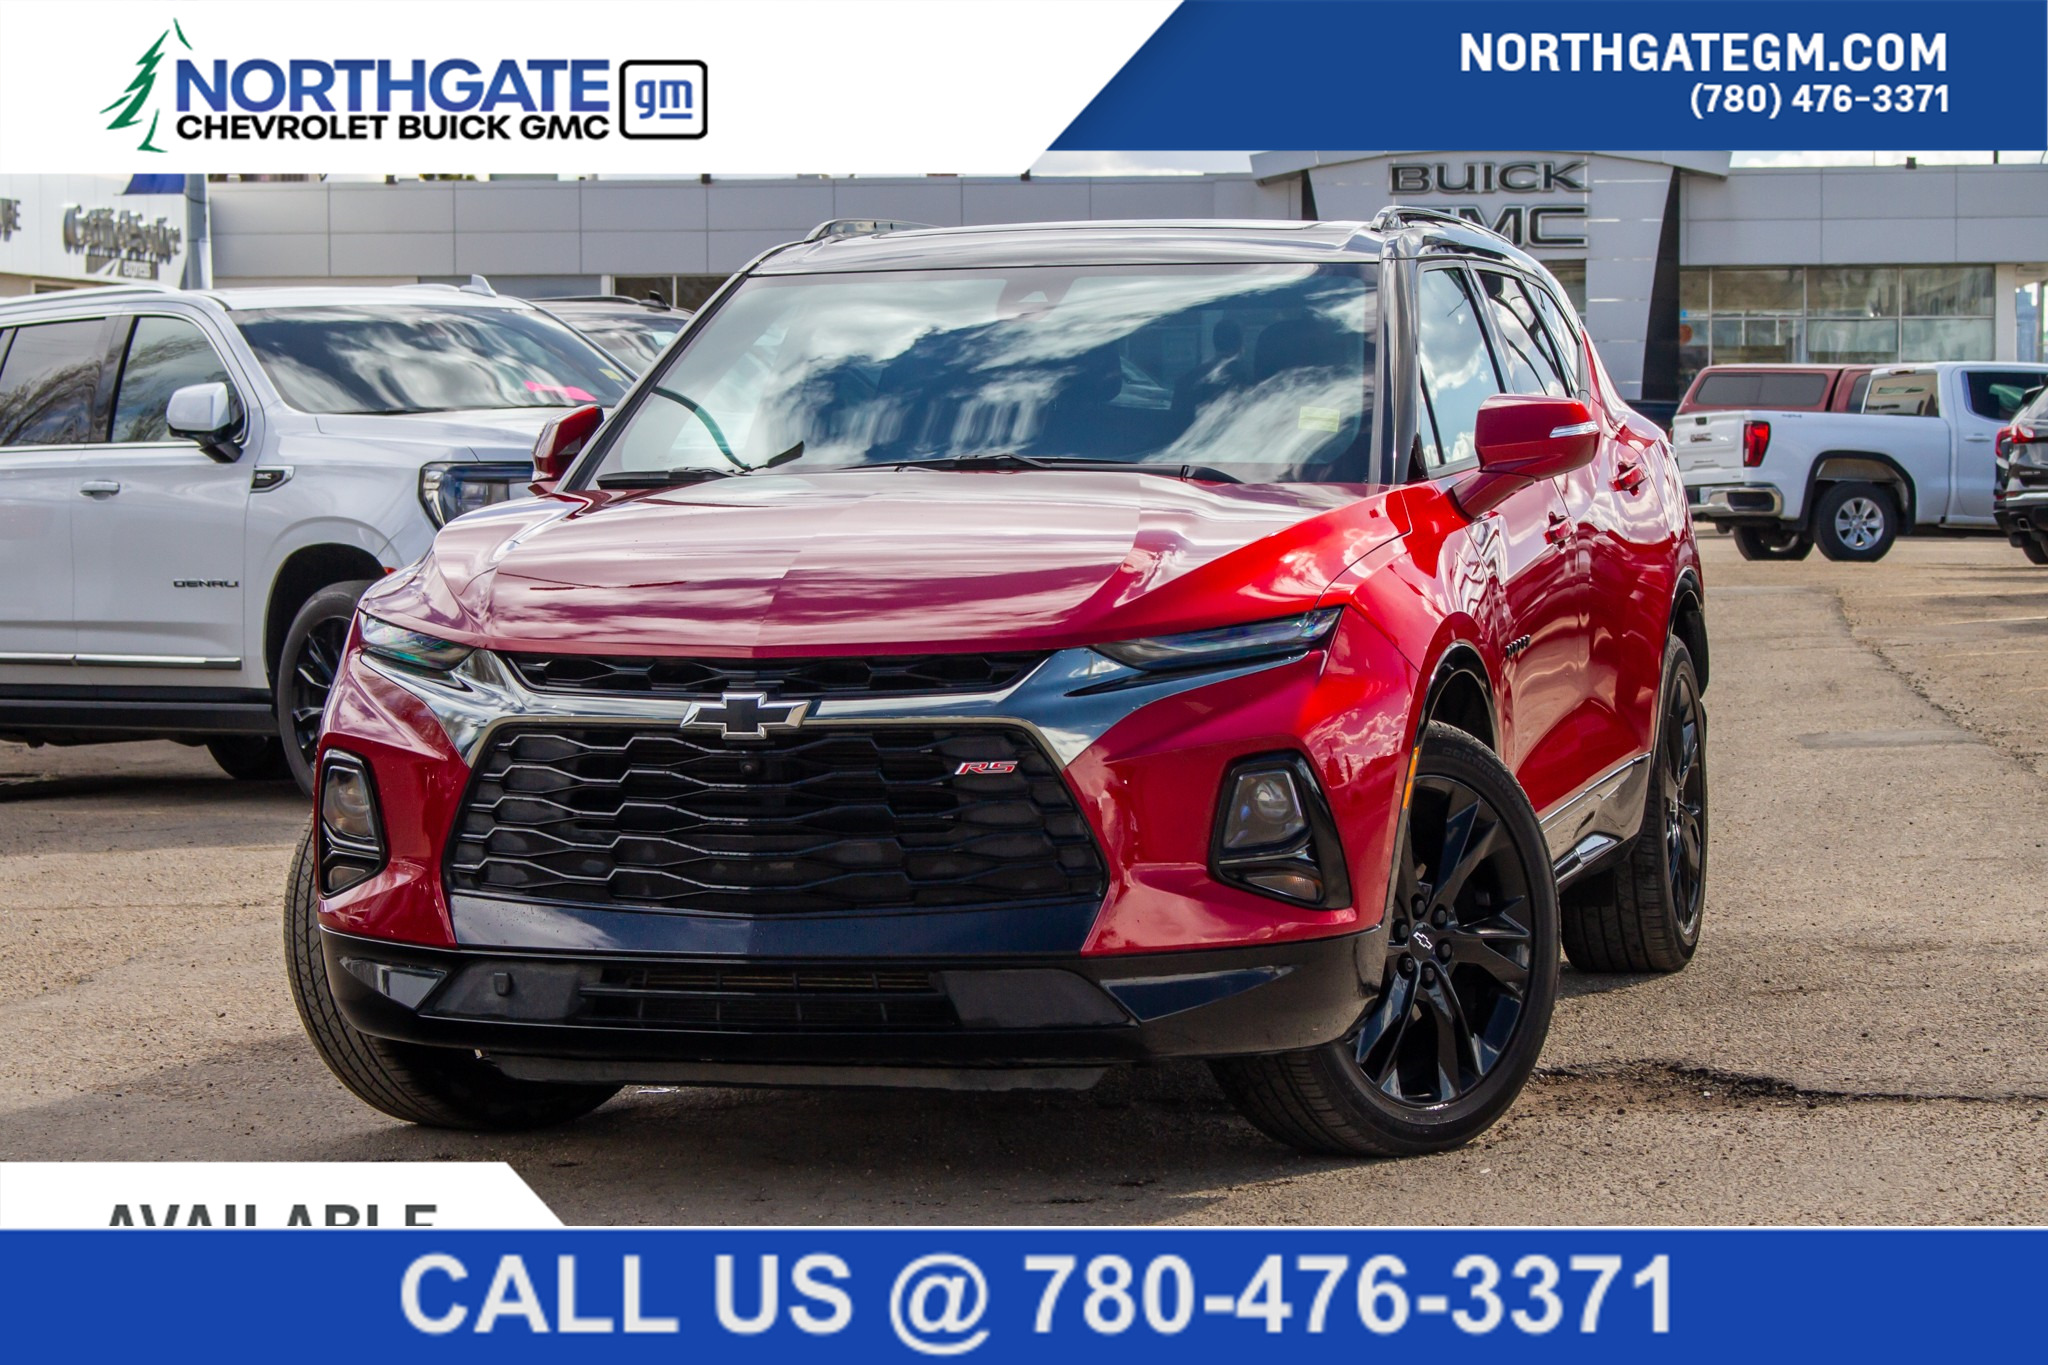 2022 Chevrolet Blazer RS GM CERTIFIED / RS / PANORAMIC SUNROOF / 21 BLAC